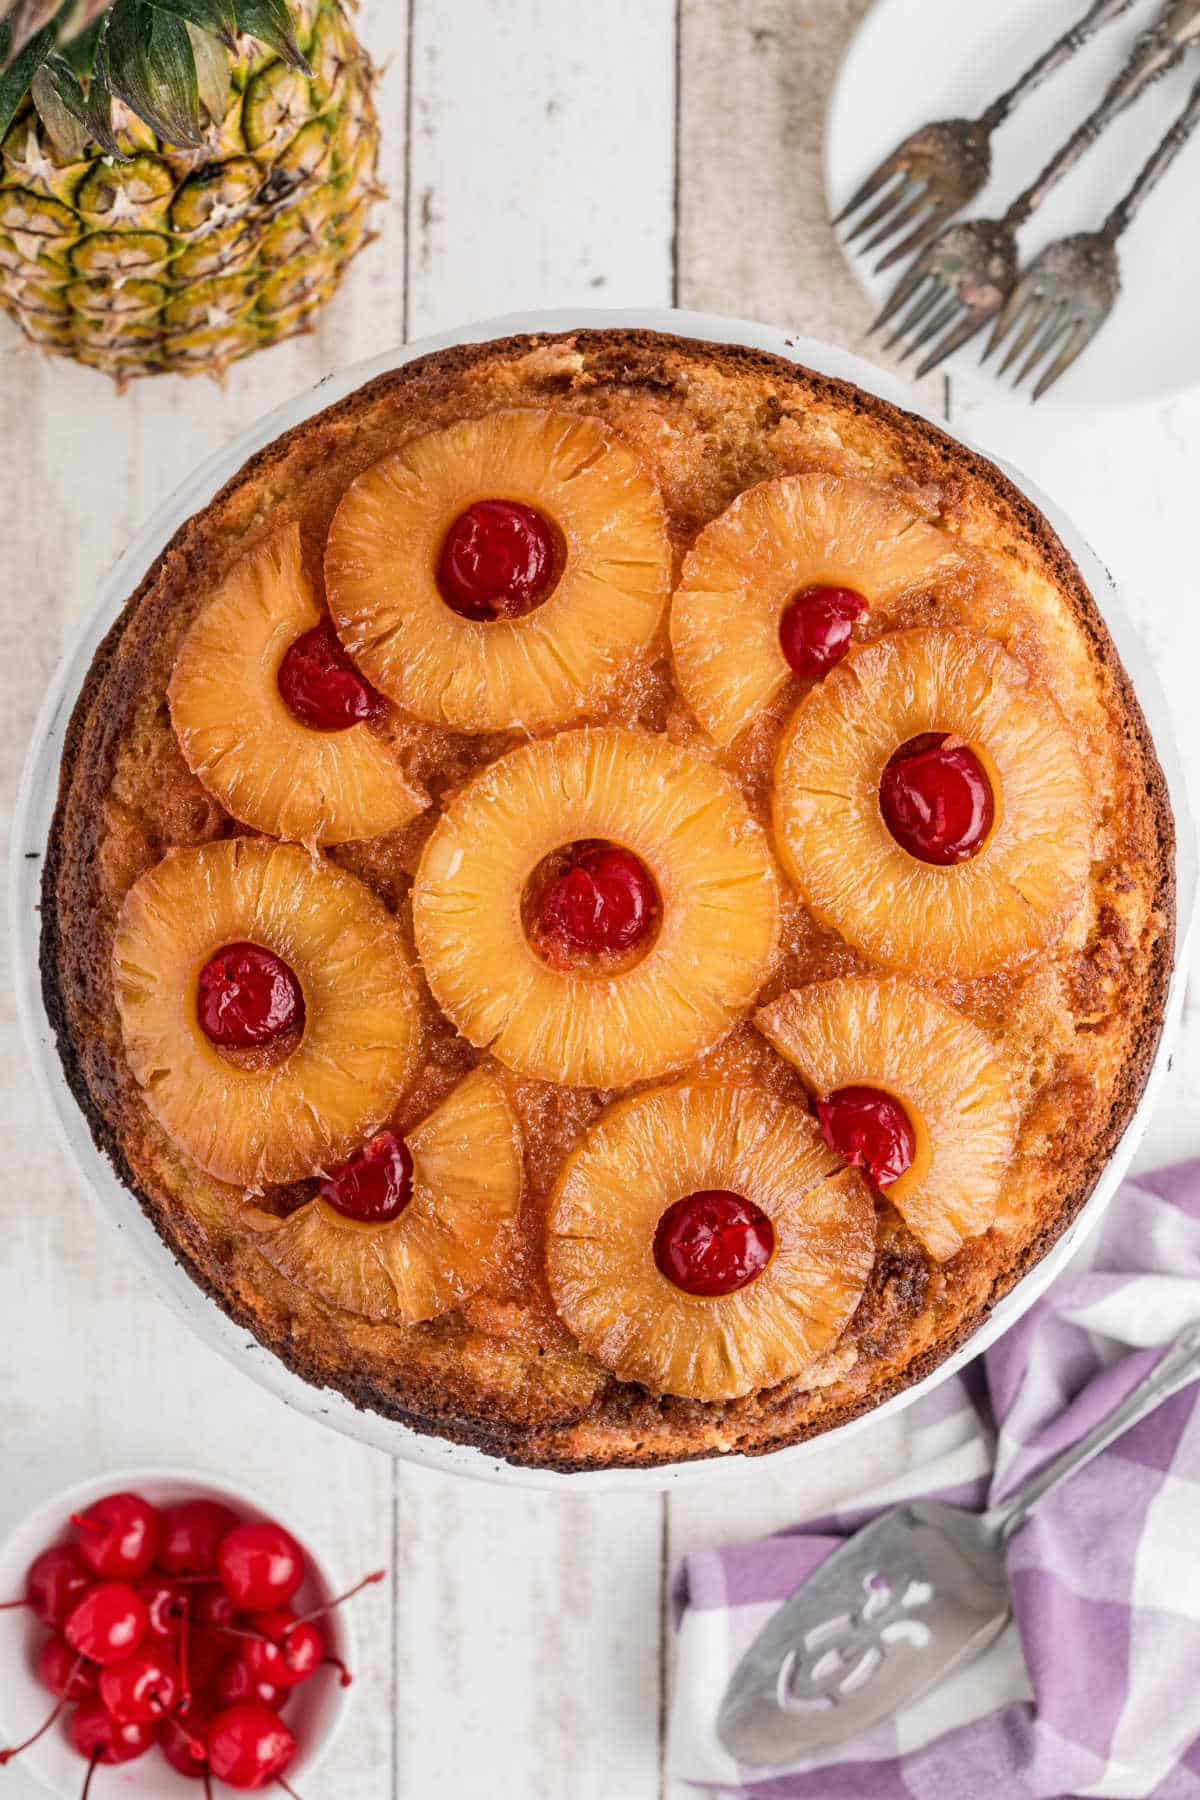 Overhead shot of a pineapple upside down cake, with slices of pineapples and cherries on top.